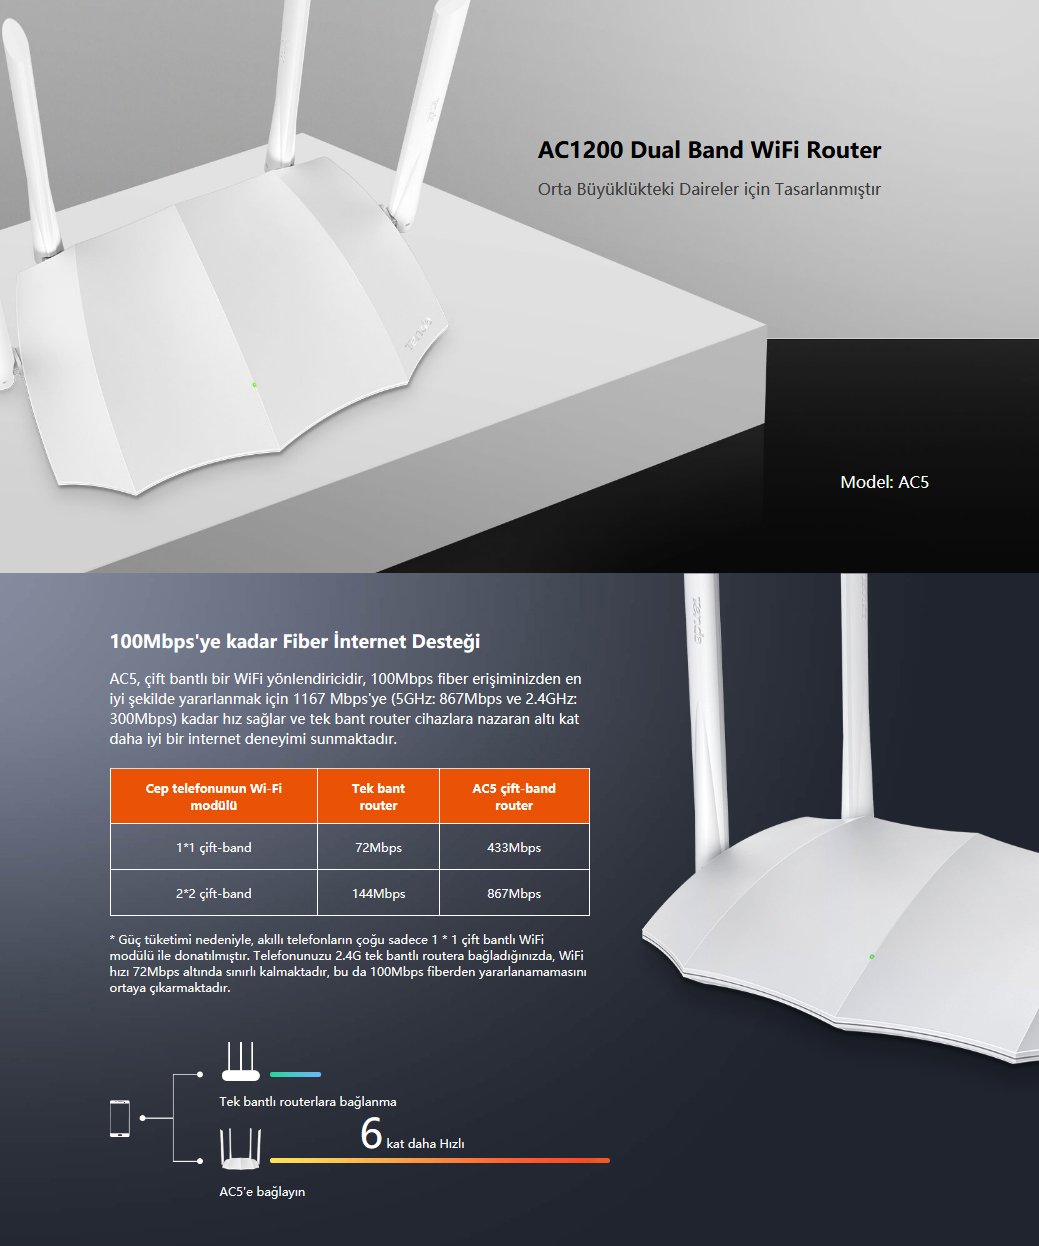 tenda-ac5-1200-mbps-dual-band-4-port-wifi-router-access-point-6.jpg (110 KB)